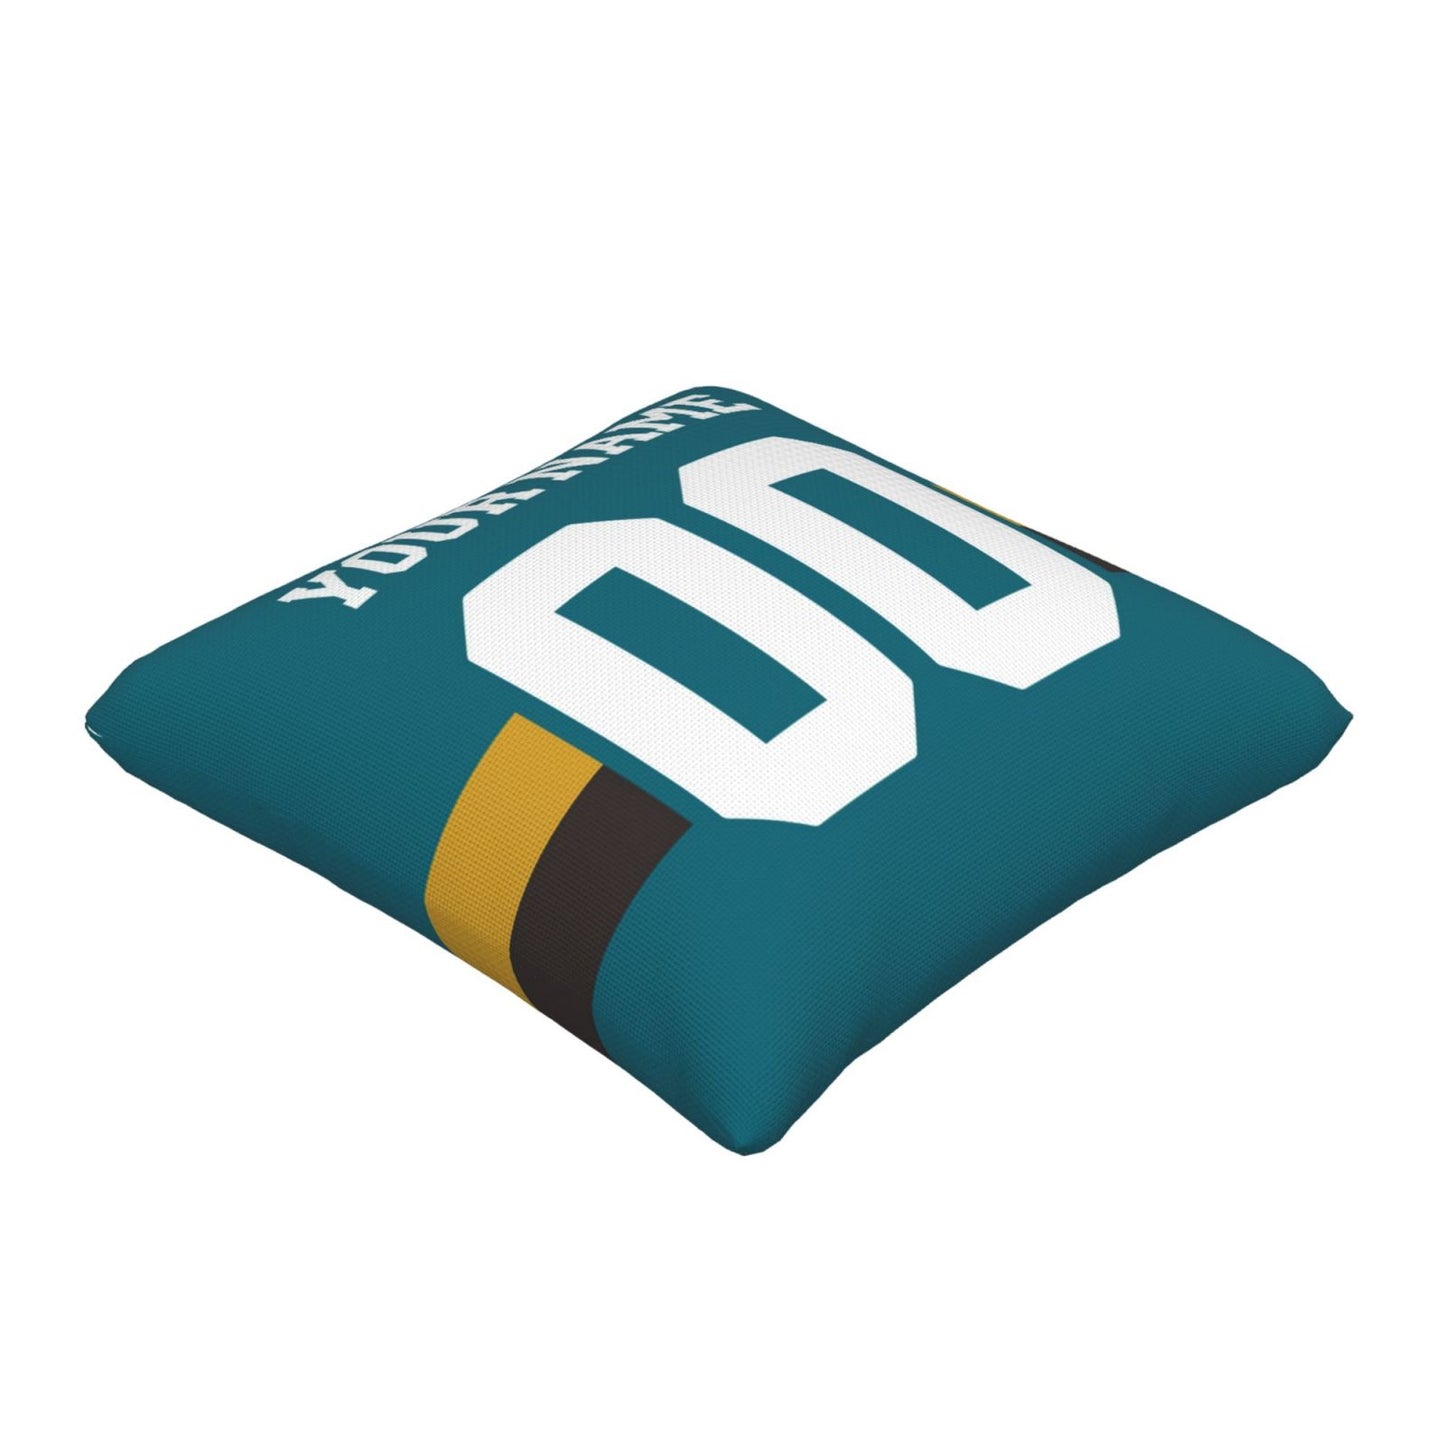 Customized Jacksonville Jaguars Football Team Decorative Throw Pillow Case Print Personalized Football Style Fans Letters & Number Teal Pillowcase Housewarming Gifts